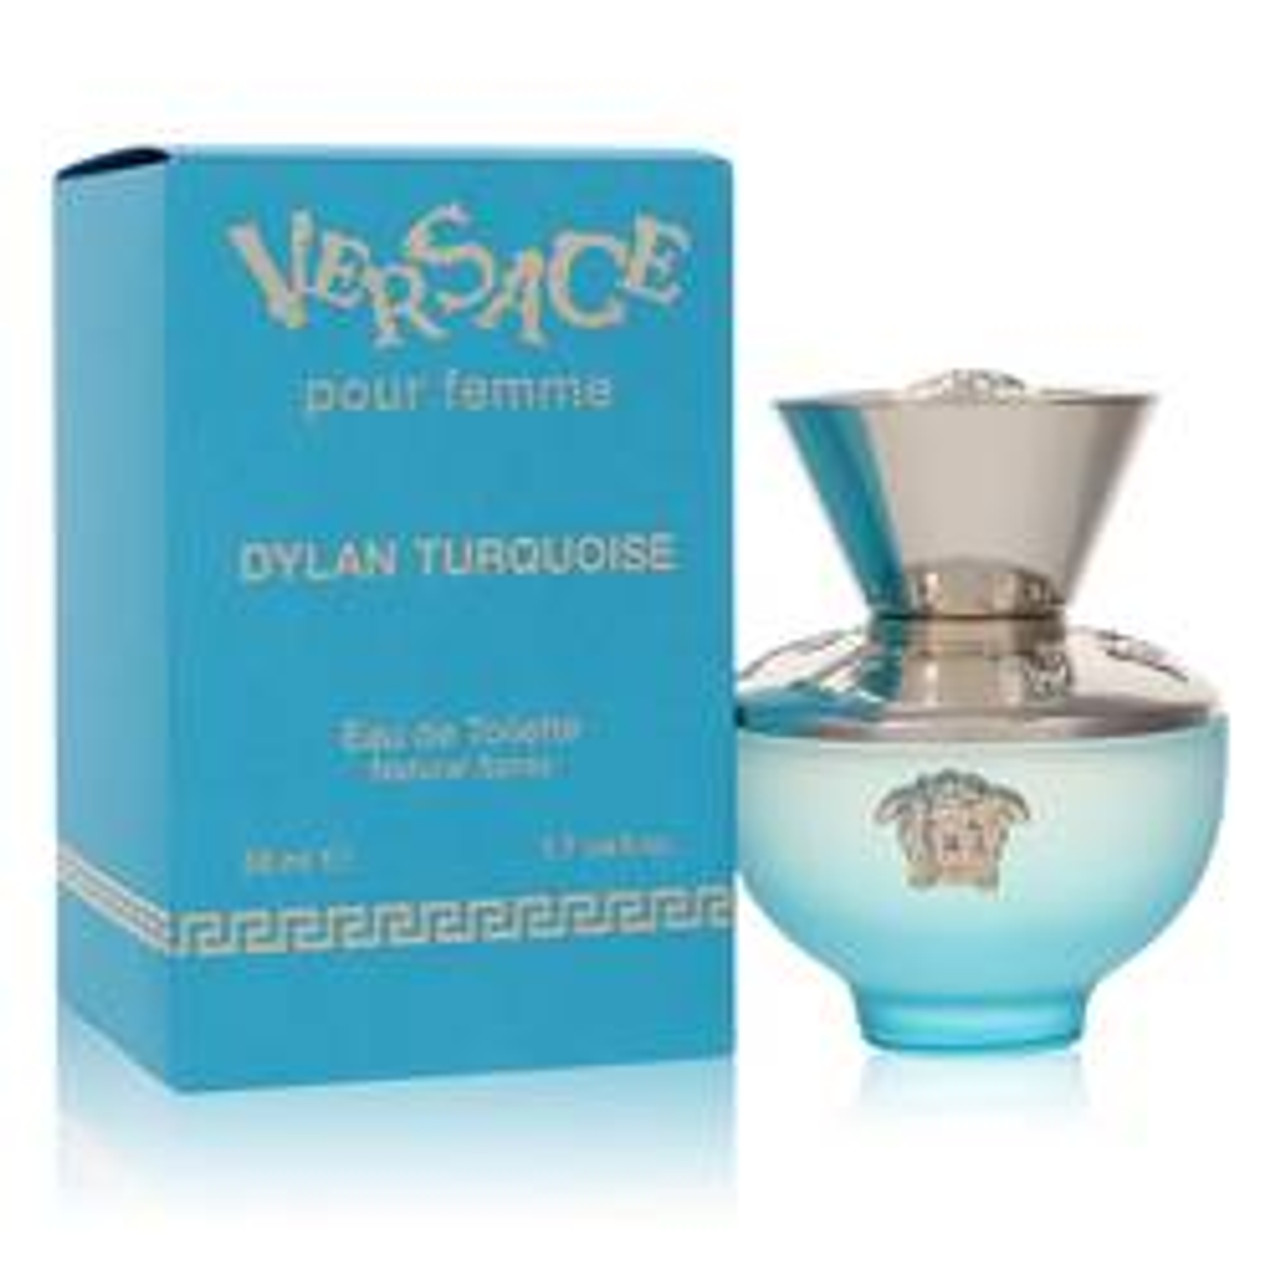 Versace Pour Femme Dylan Turquoise Perfume By Versace Eau De Toilette Spray 1.7 oz for Women - [From 108.00 - Choose pk Qty ] - *Ships from Miami